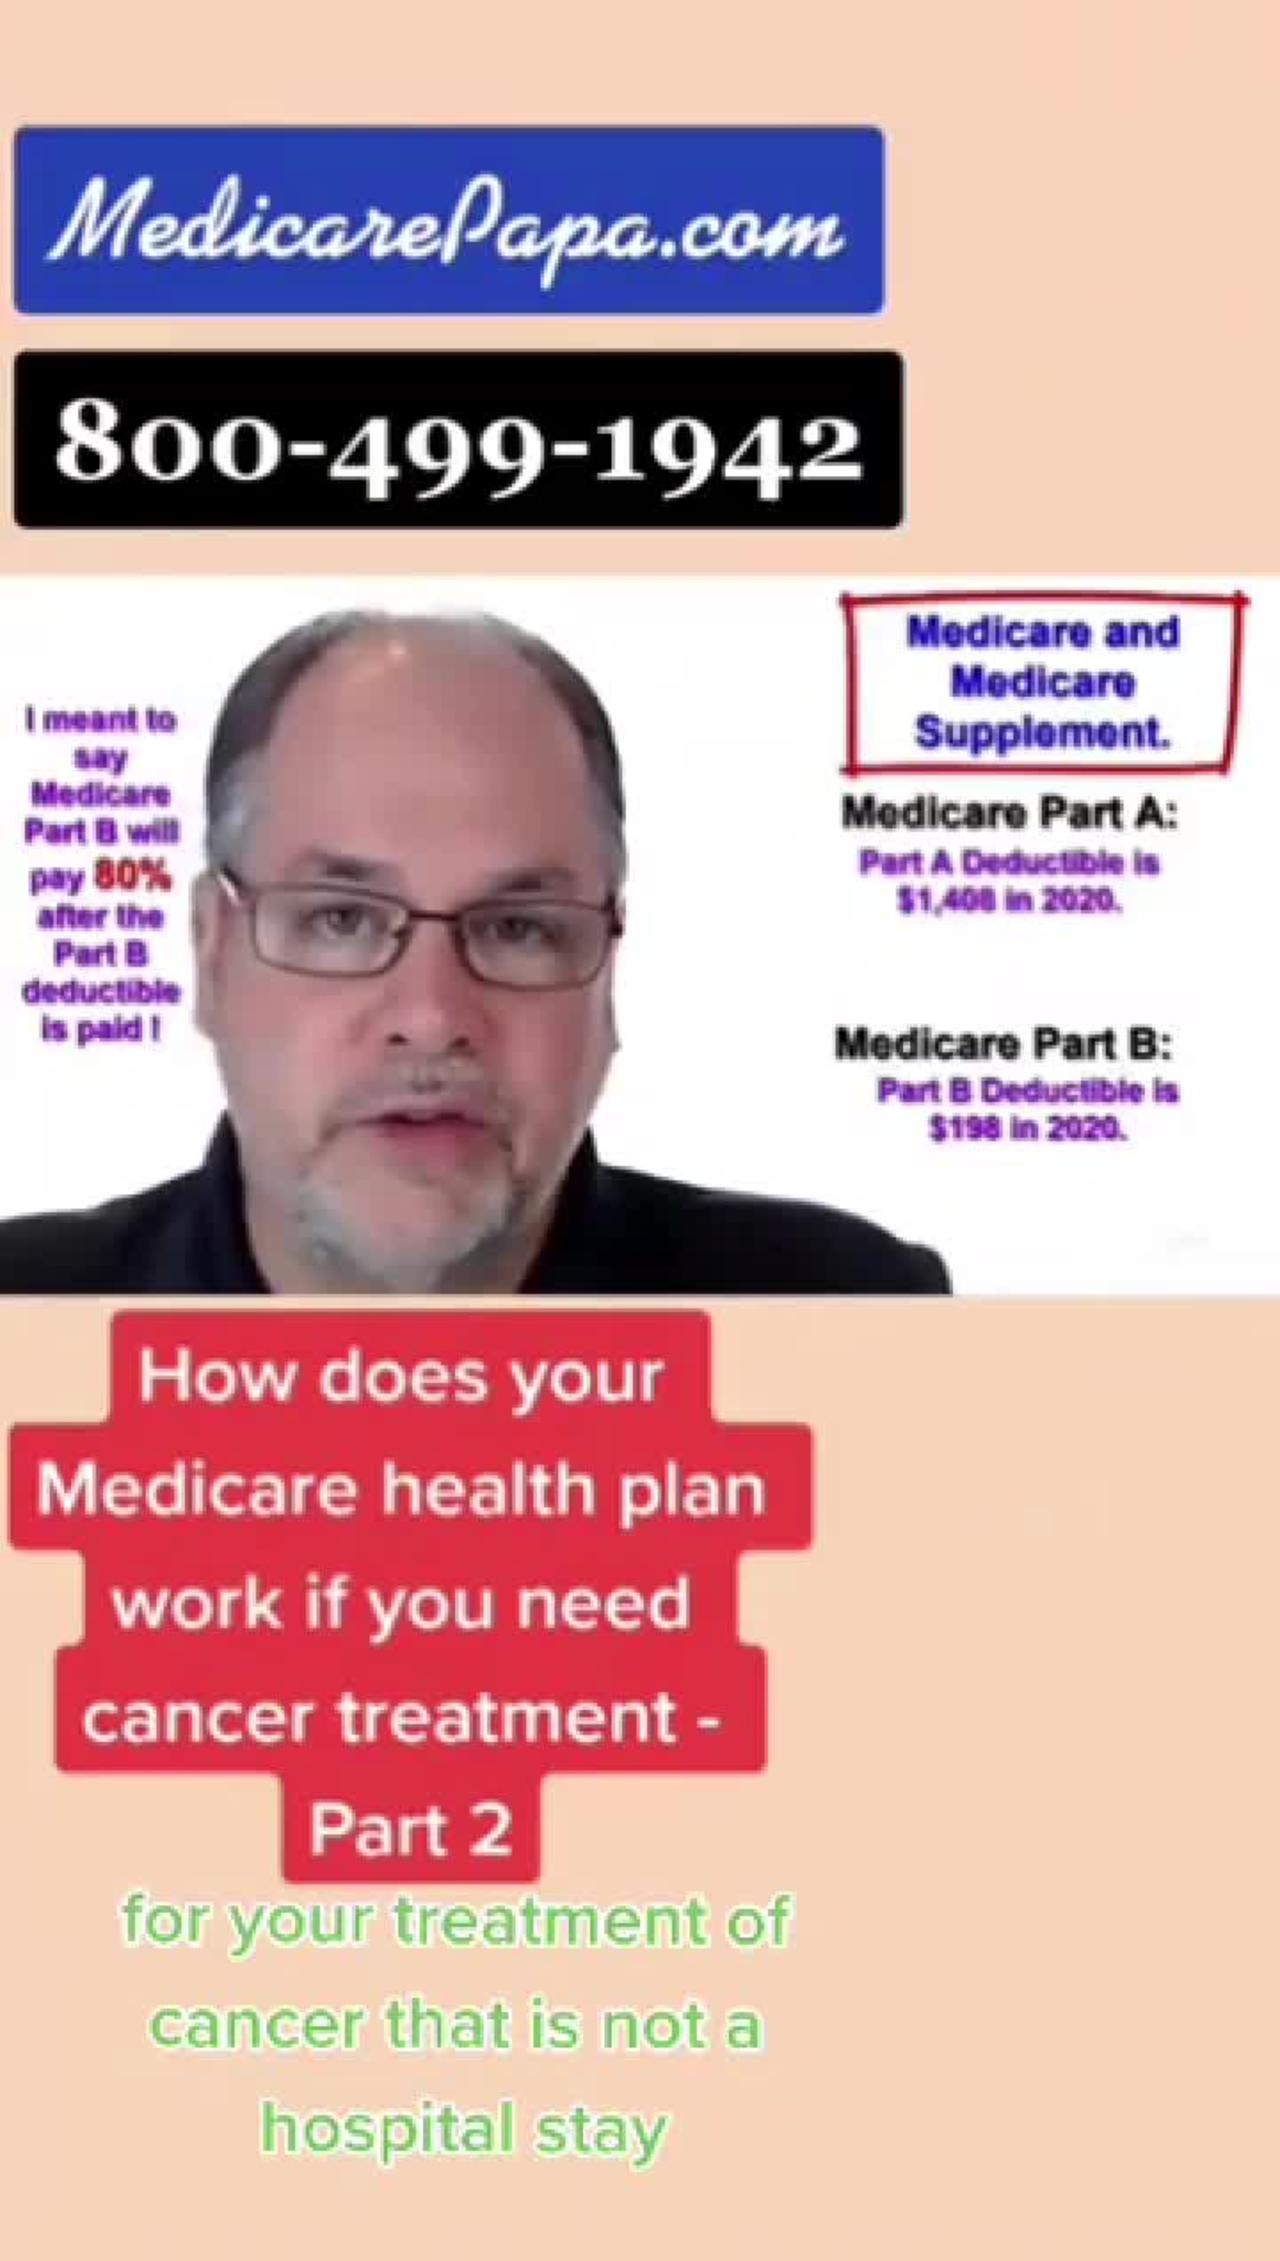 Episode 2 - How does your Medicare health plan work if you need cancer treatment.